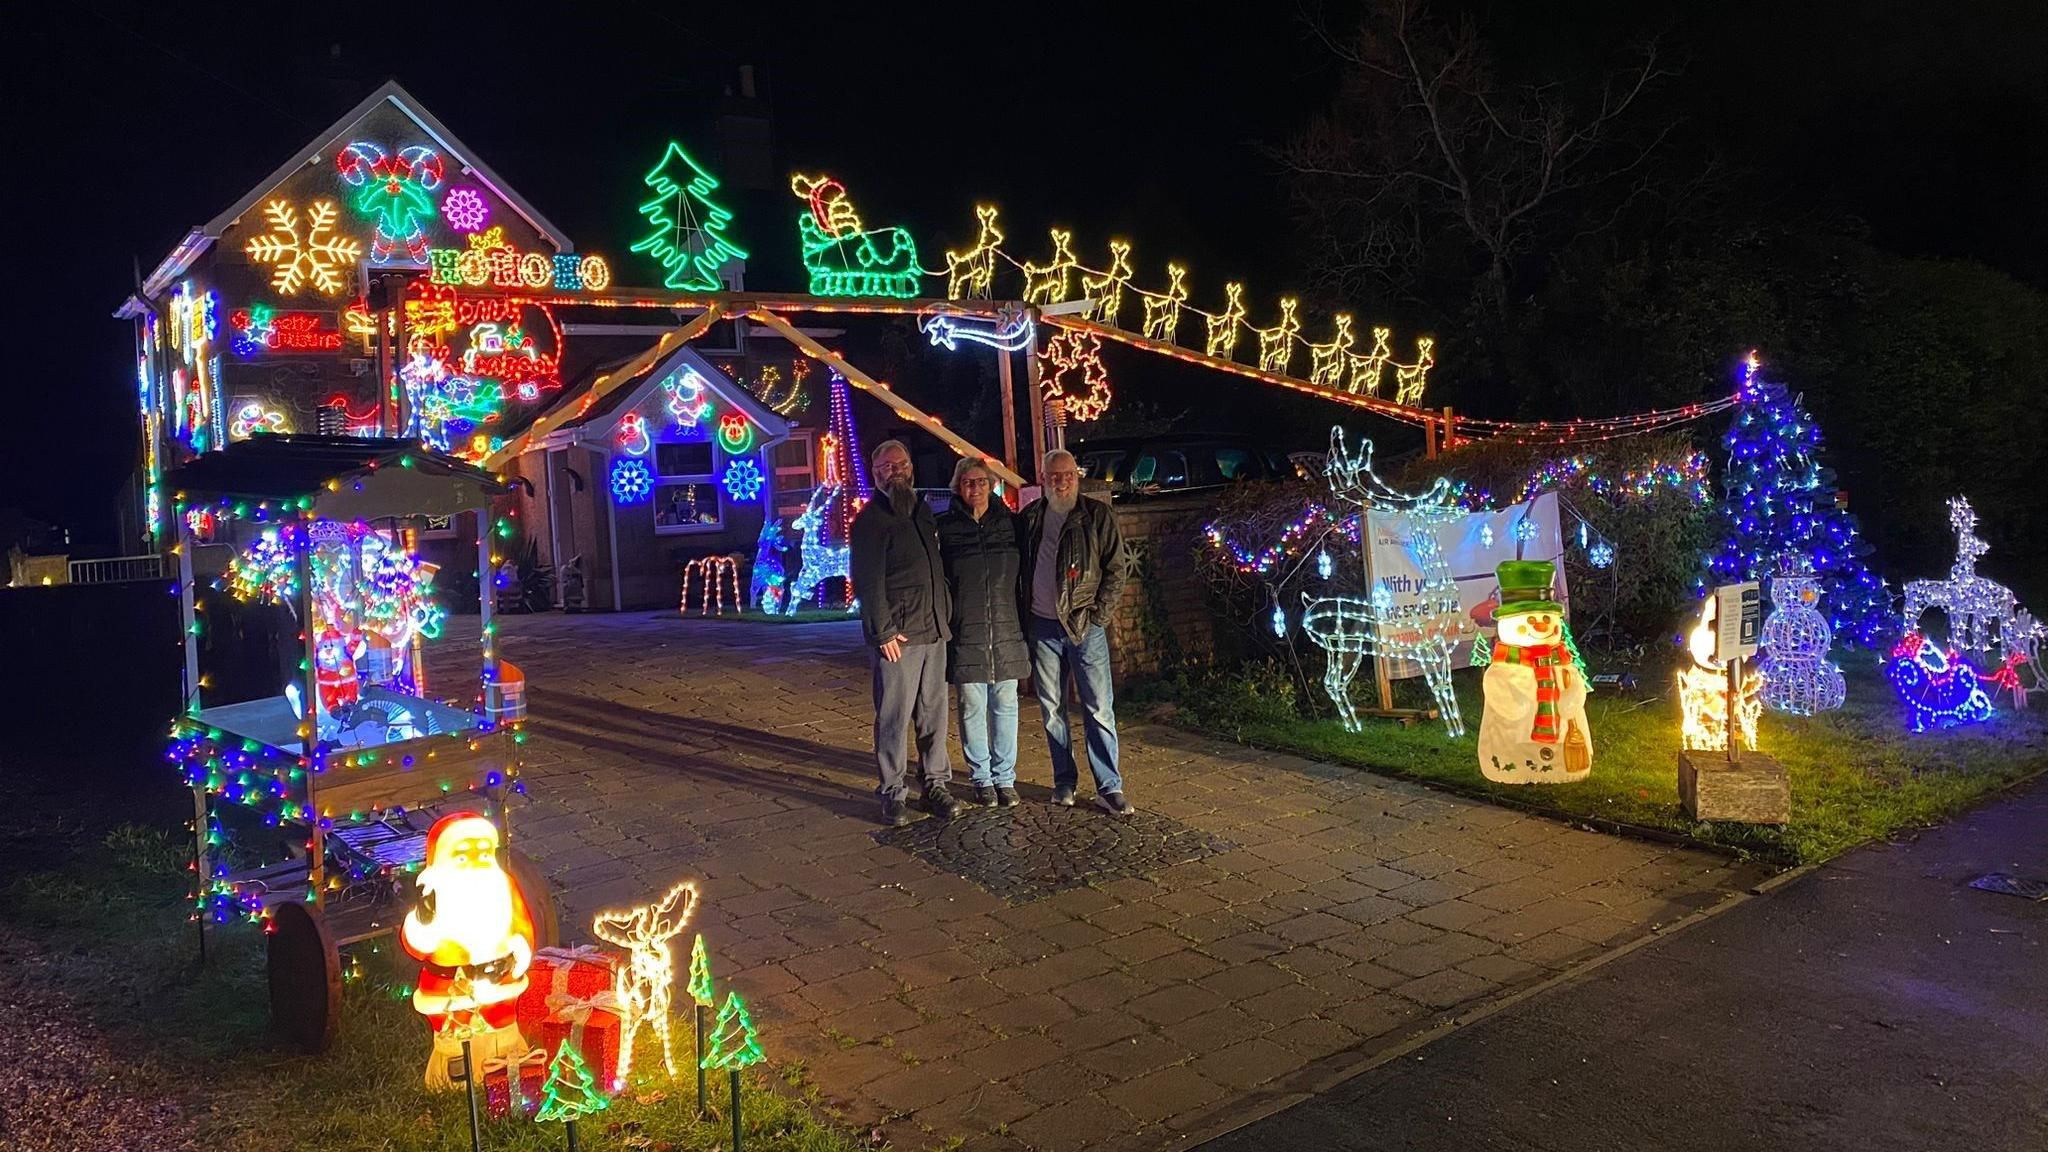 A Christmas display in front of a house 